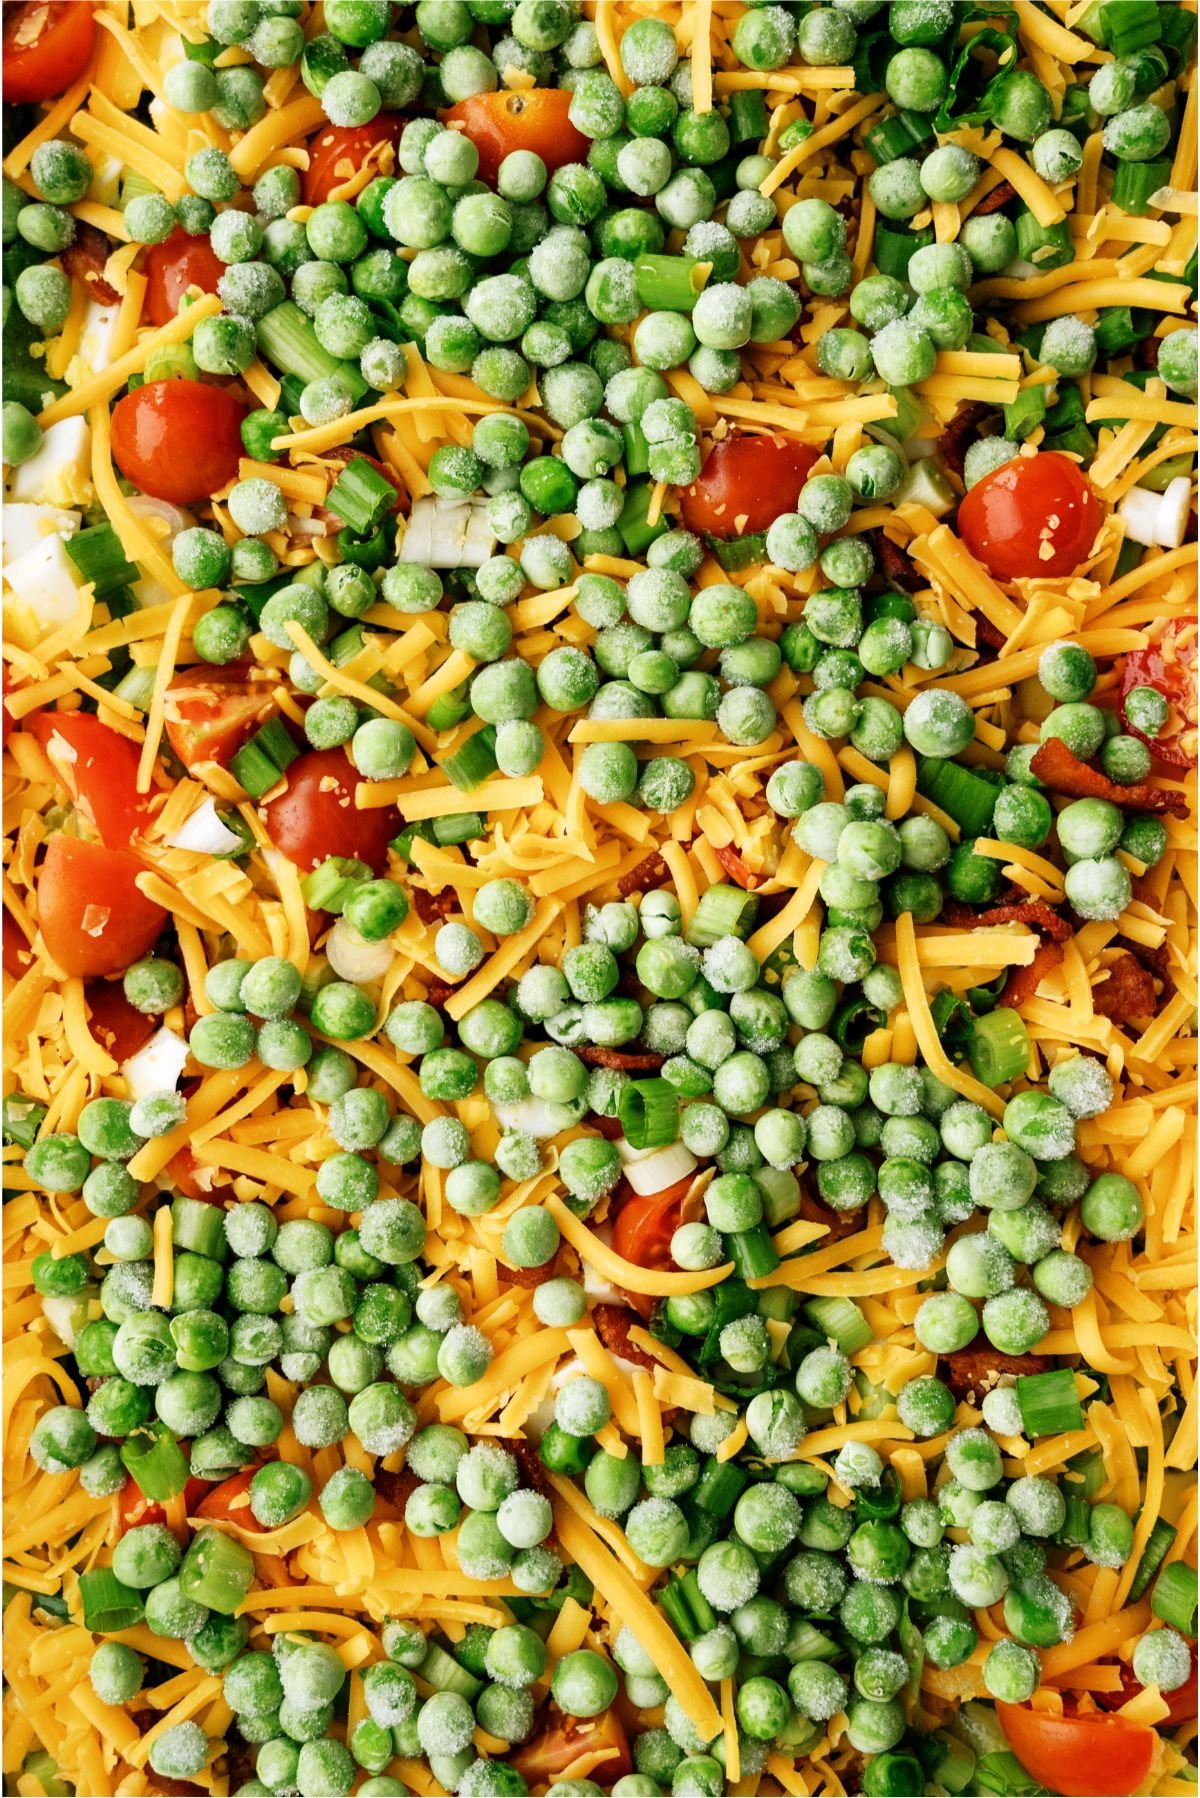 Layer of frozen peas added on top